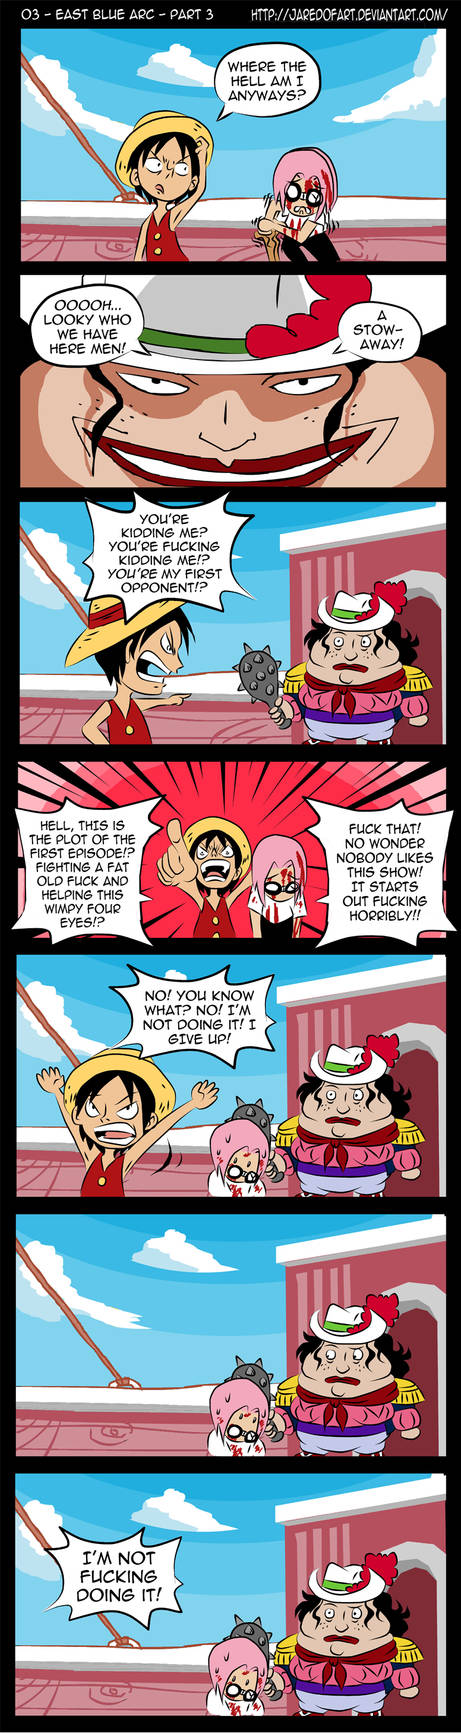 one piece Archives - Page 3 of 14 - Nerds4Life